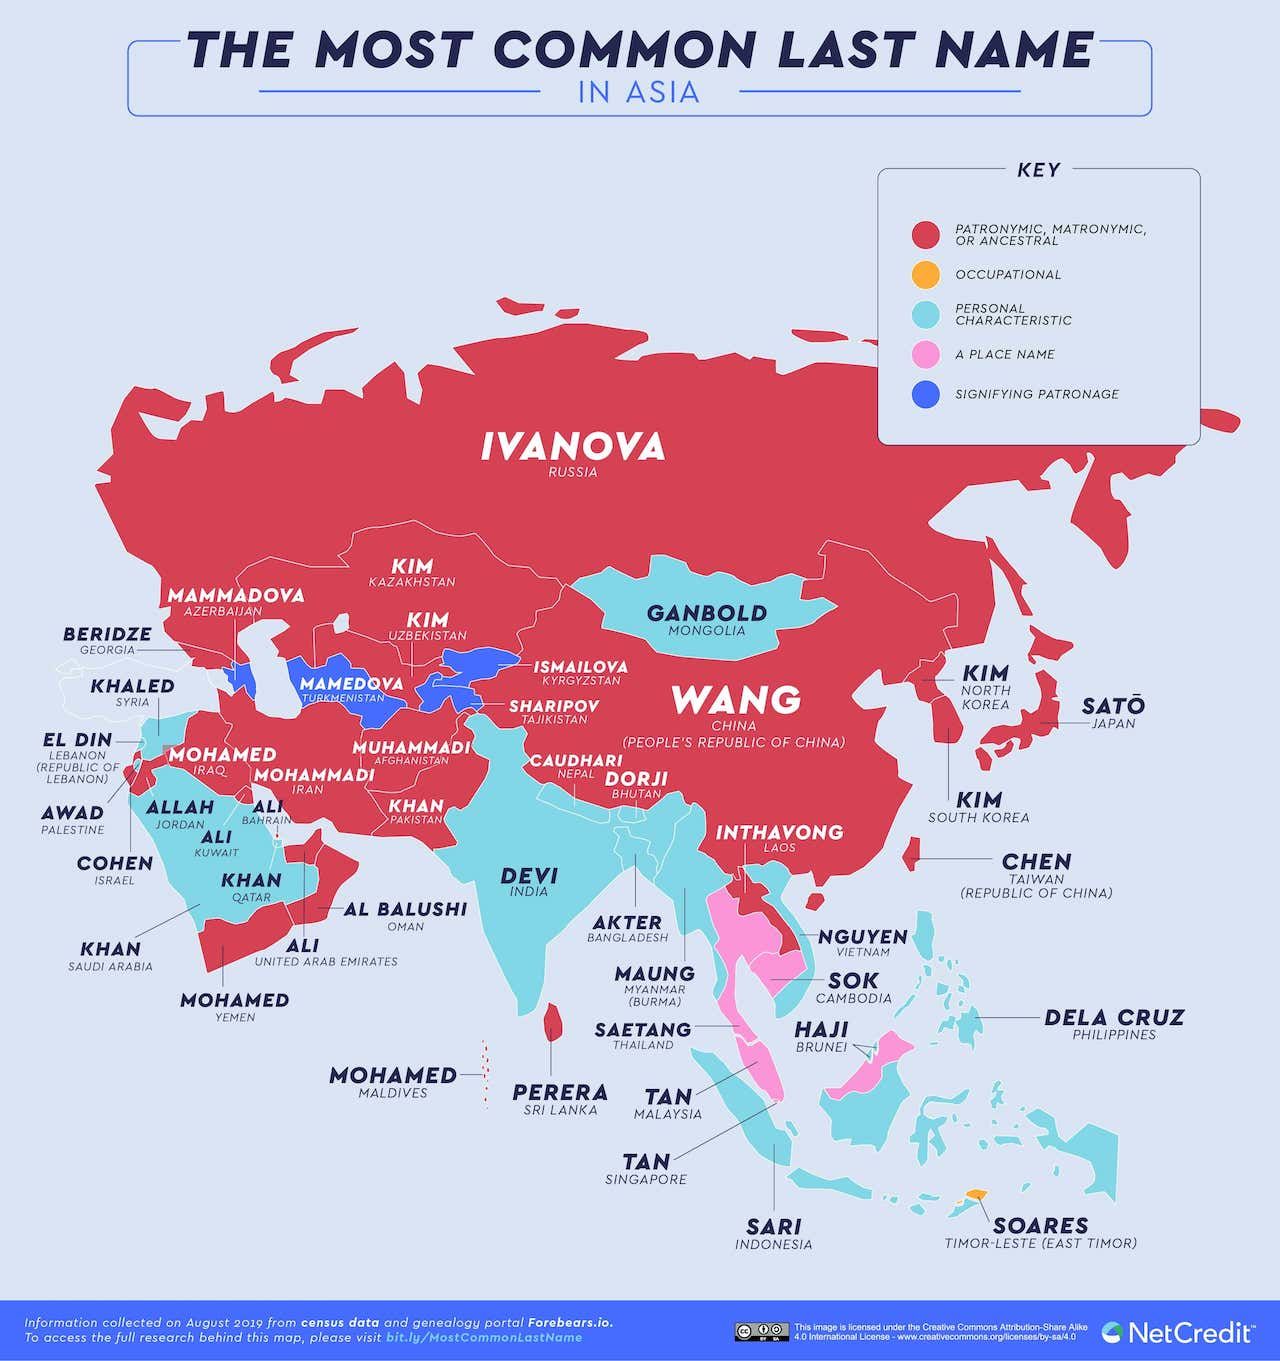 03_The-most-common-last-name-in-every-country_Asia.jpg